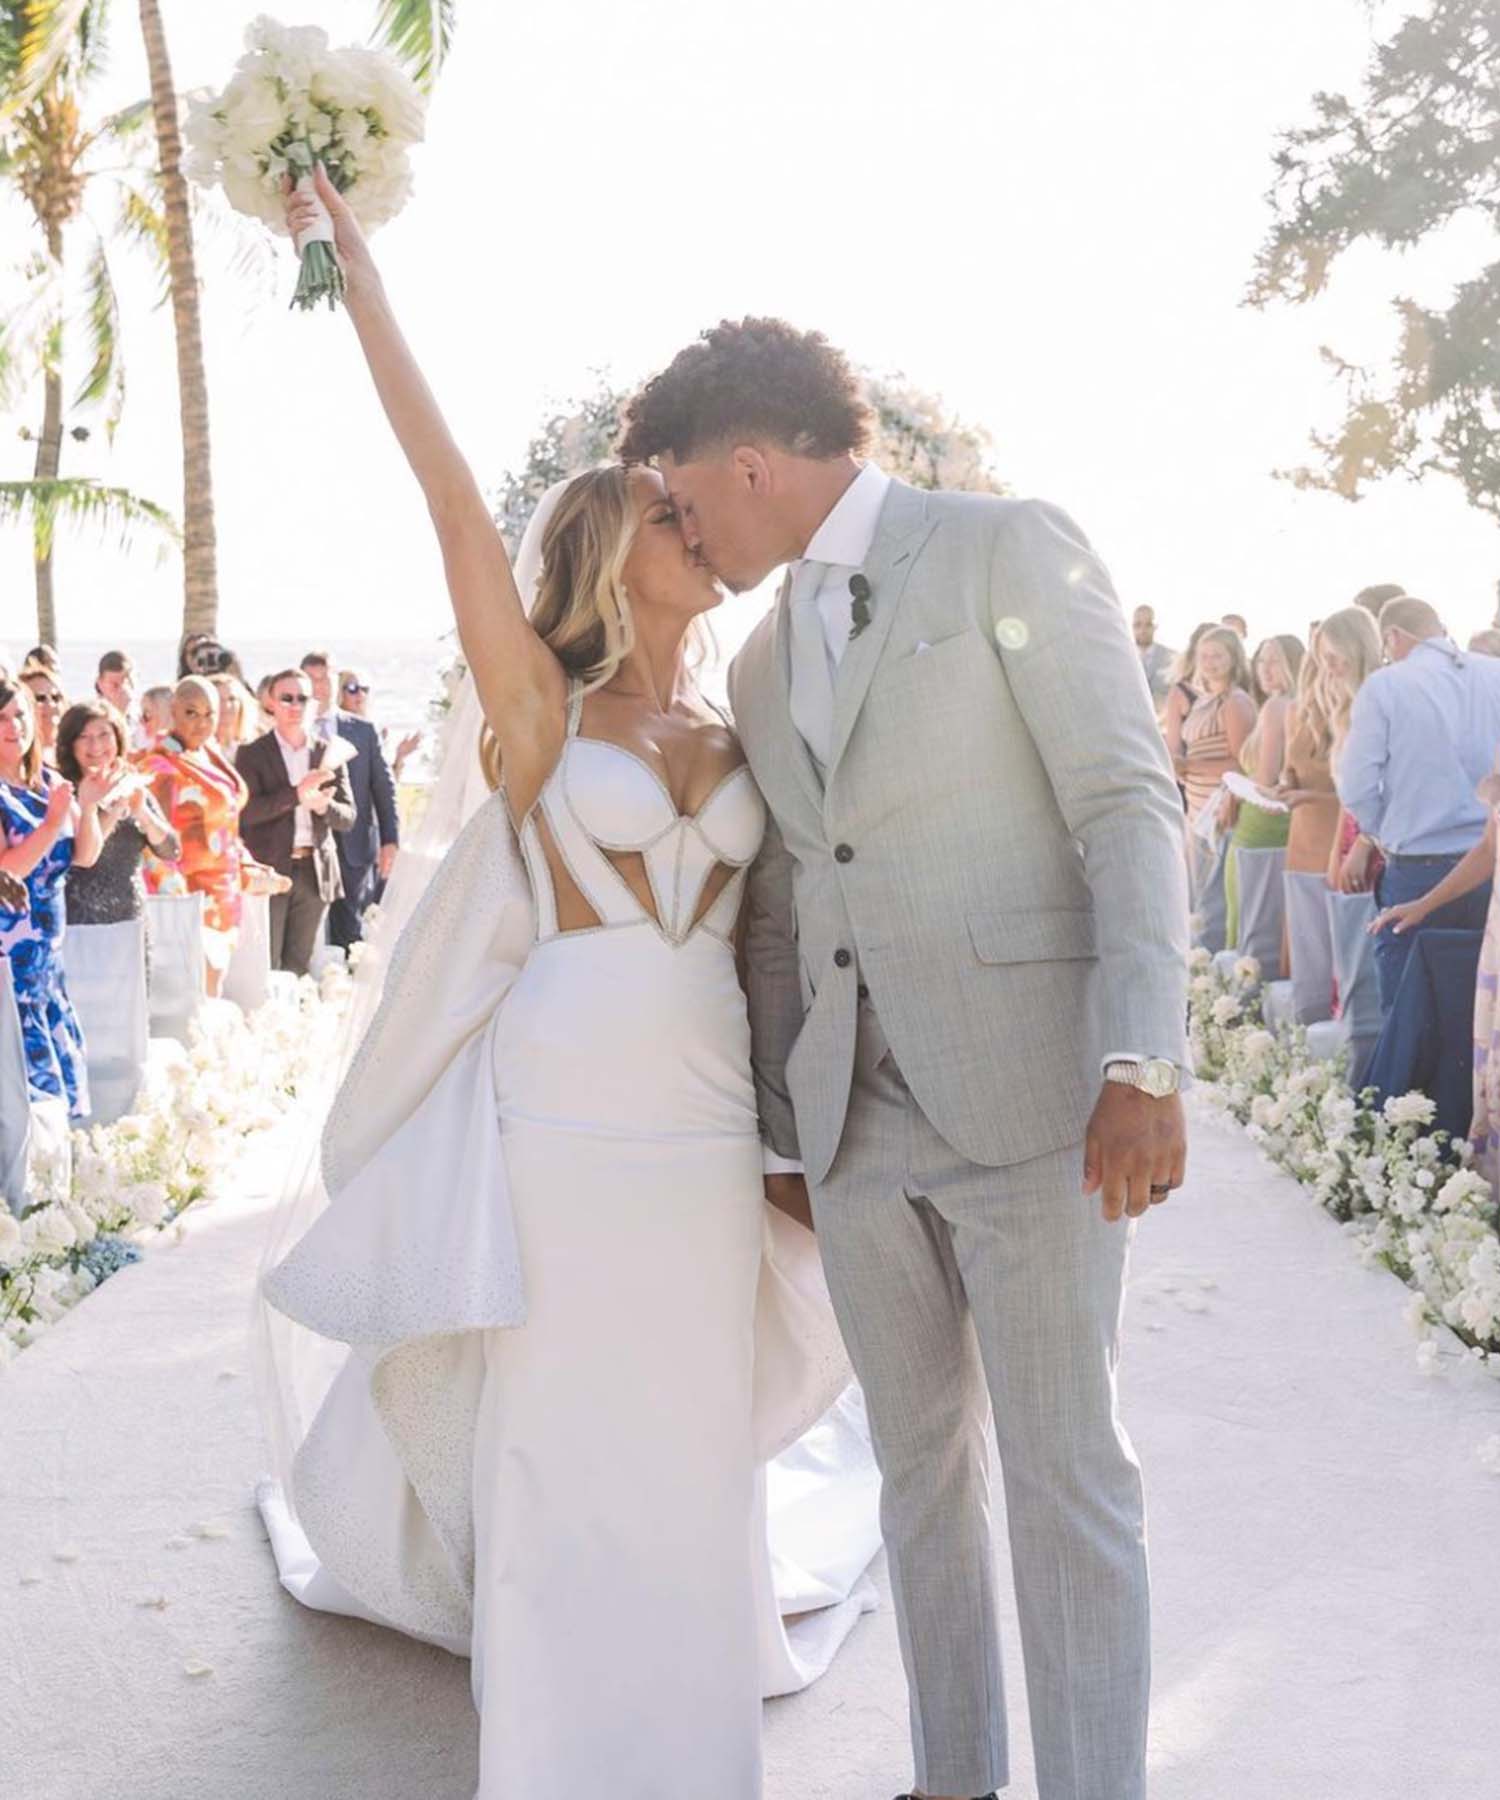 Patrick Mahomes Officially Ties The Knot With Fiancé Brittany Matthews ...